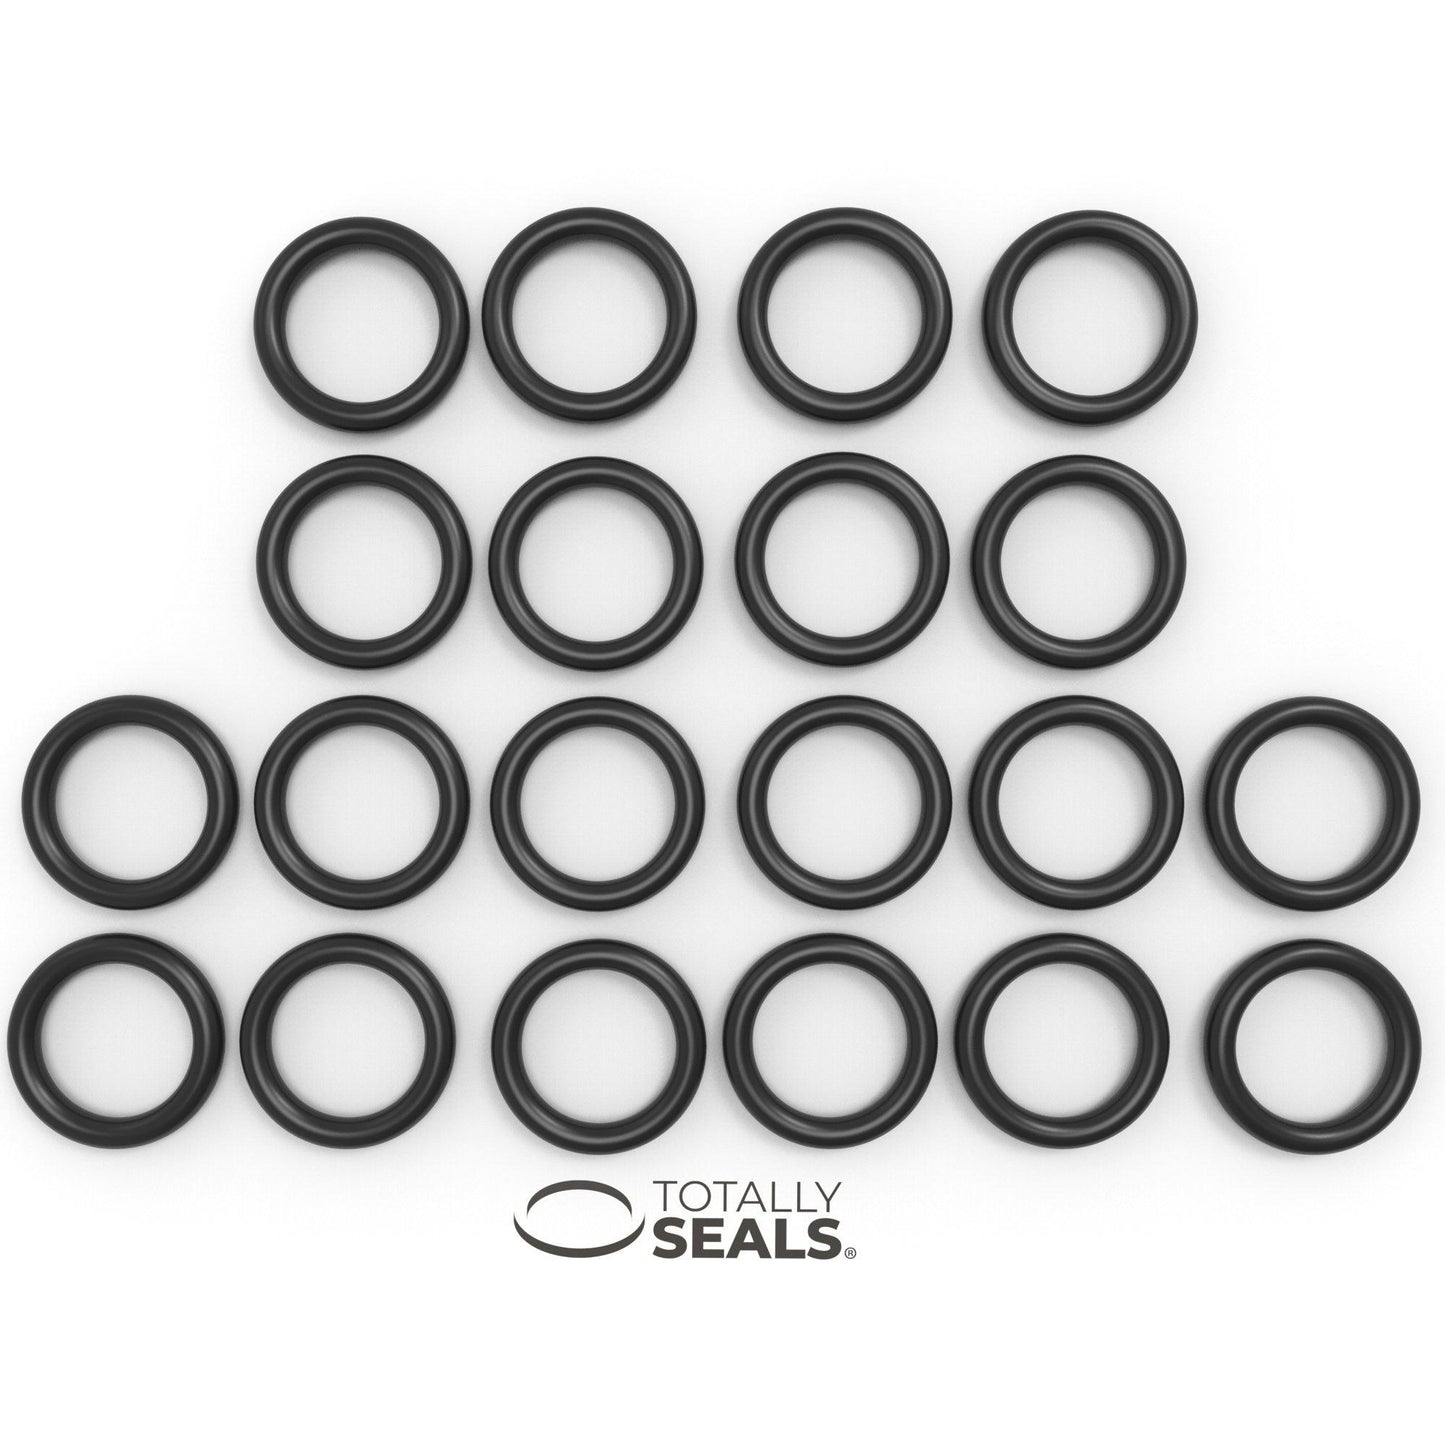 35mm x 2mm (39mm OD) Nitrile O-Rings - Totally Seals®